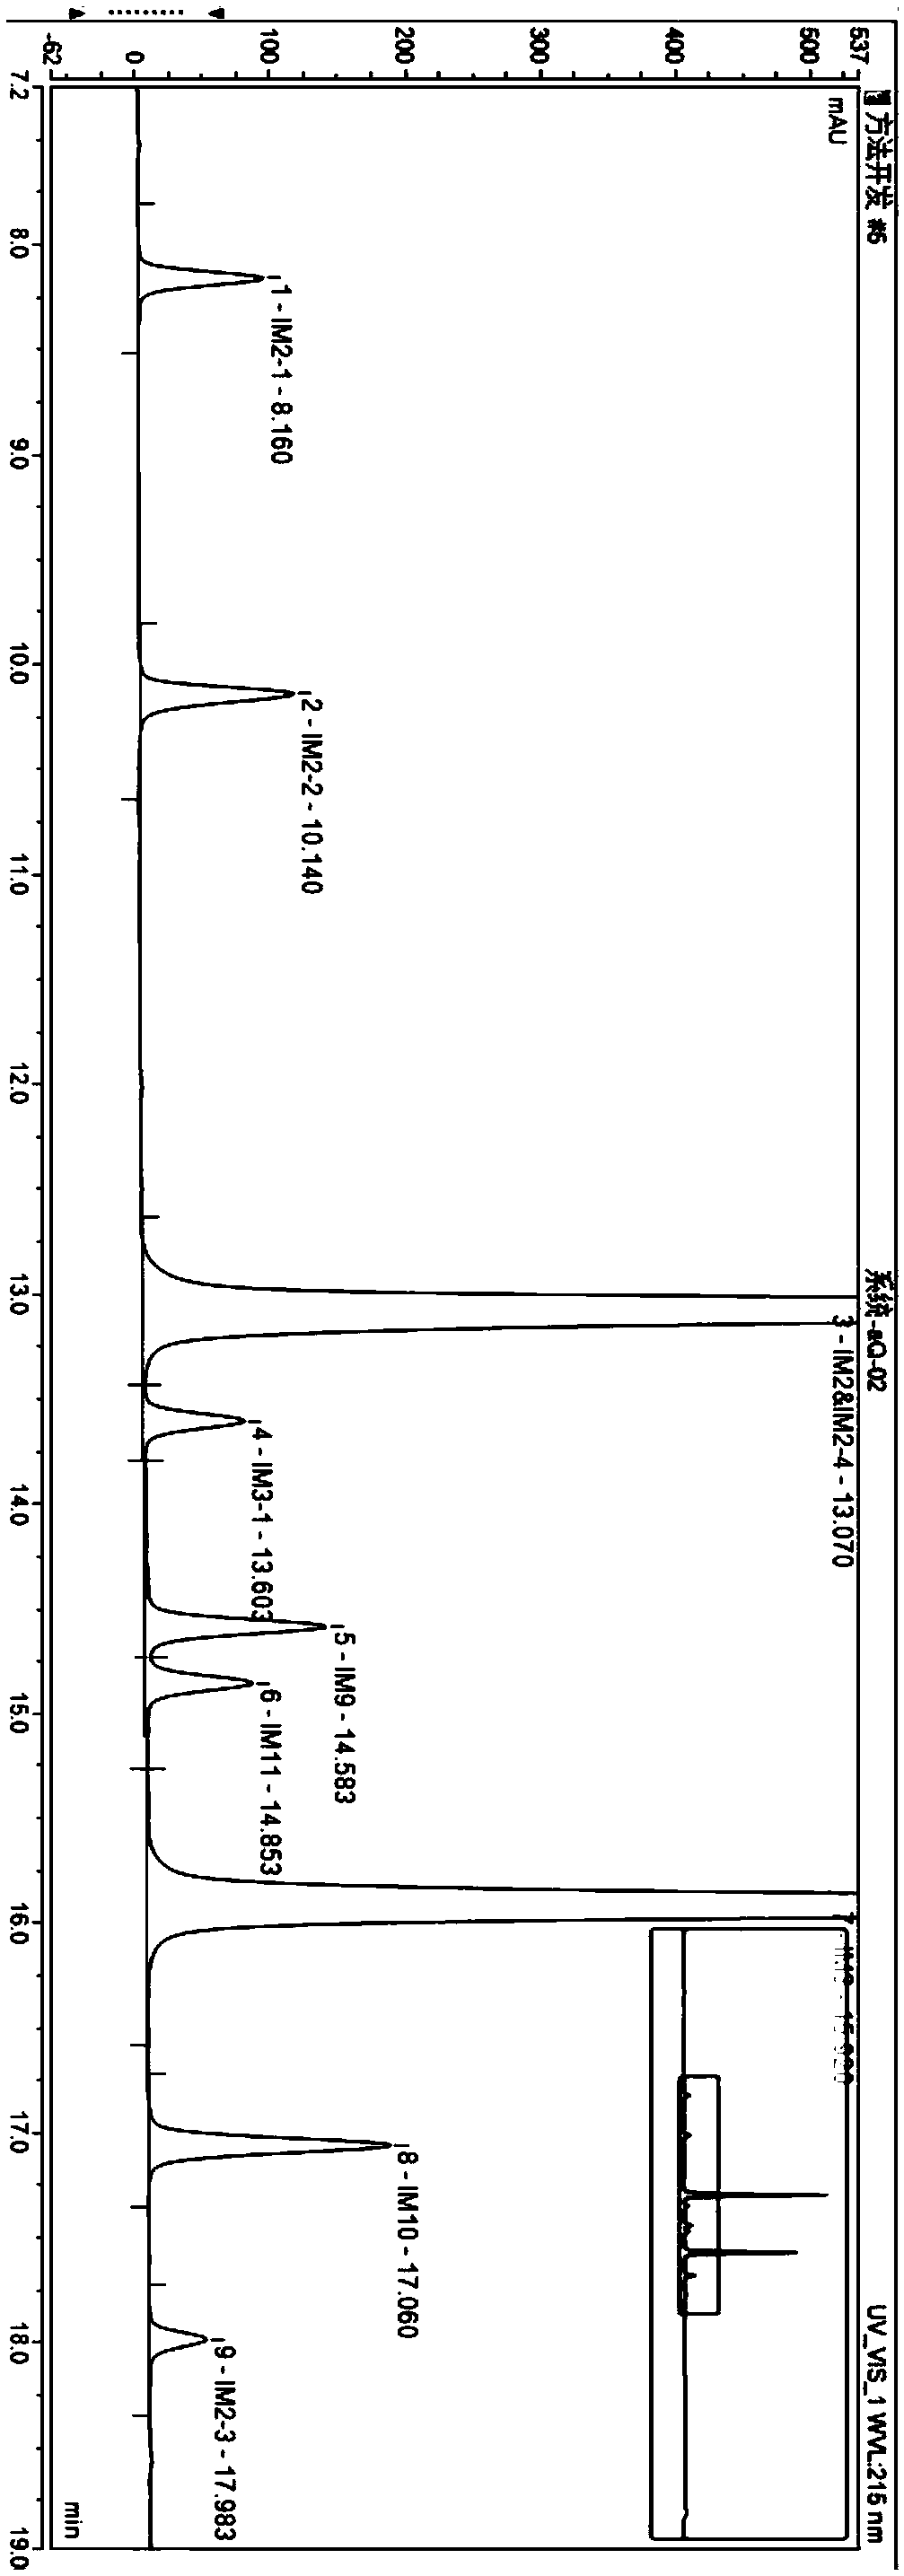 Liquid chromatography method for detecting parecoxib sodium and related substances in synthesis intermediate